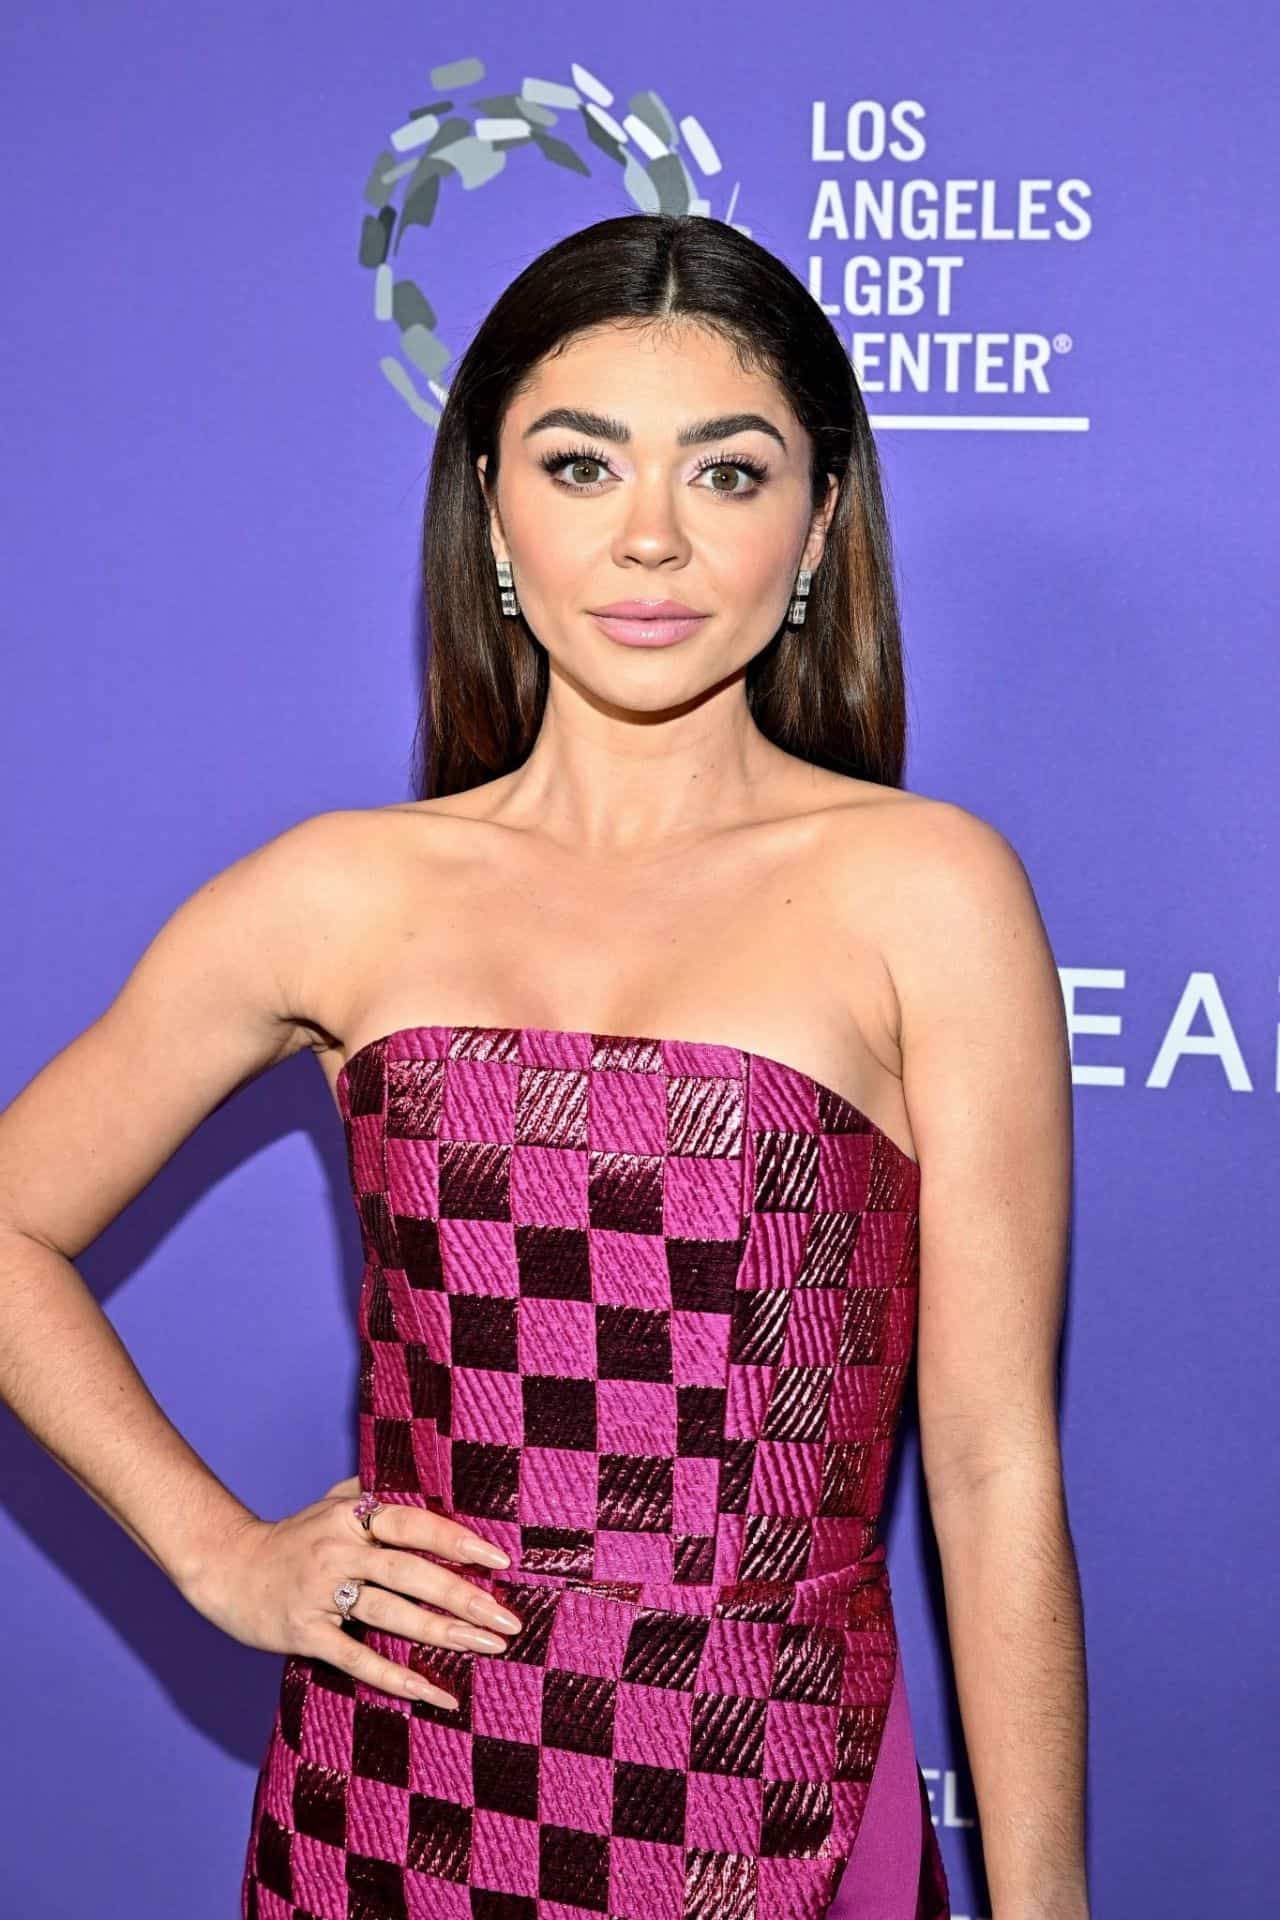 Sarah Hyland Steals the Show at Los Angeles LGBT Center Gala